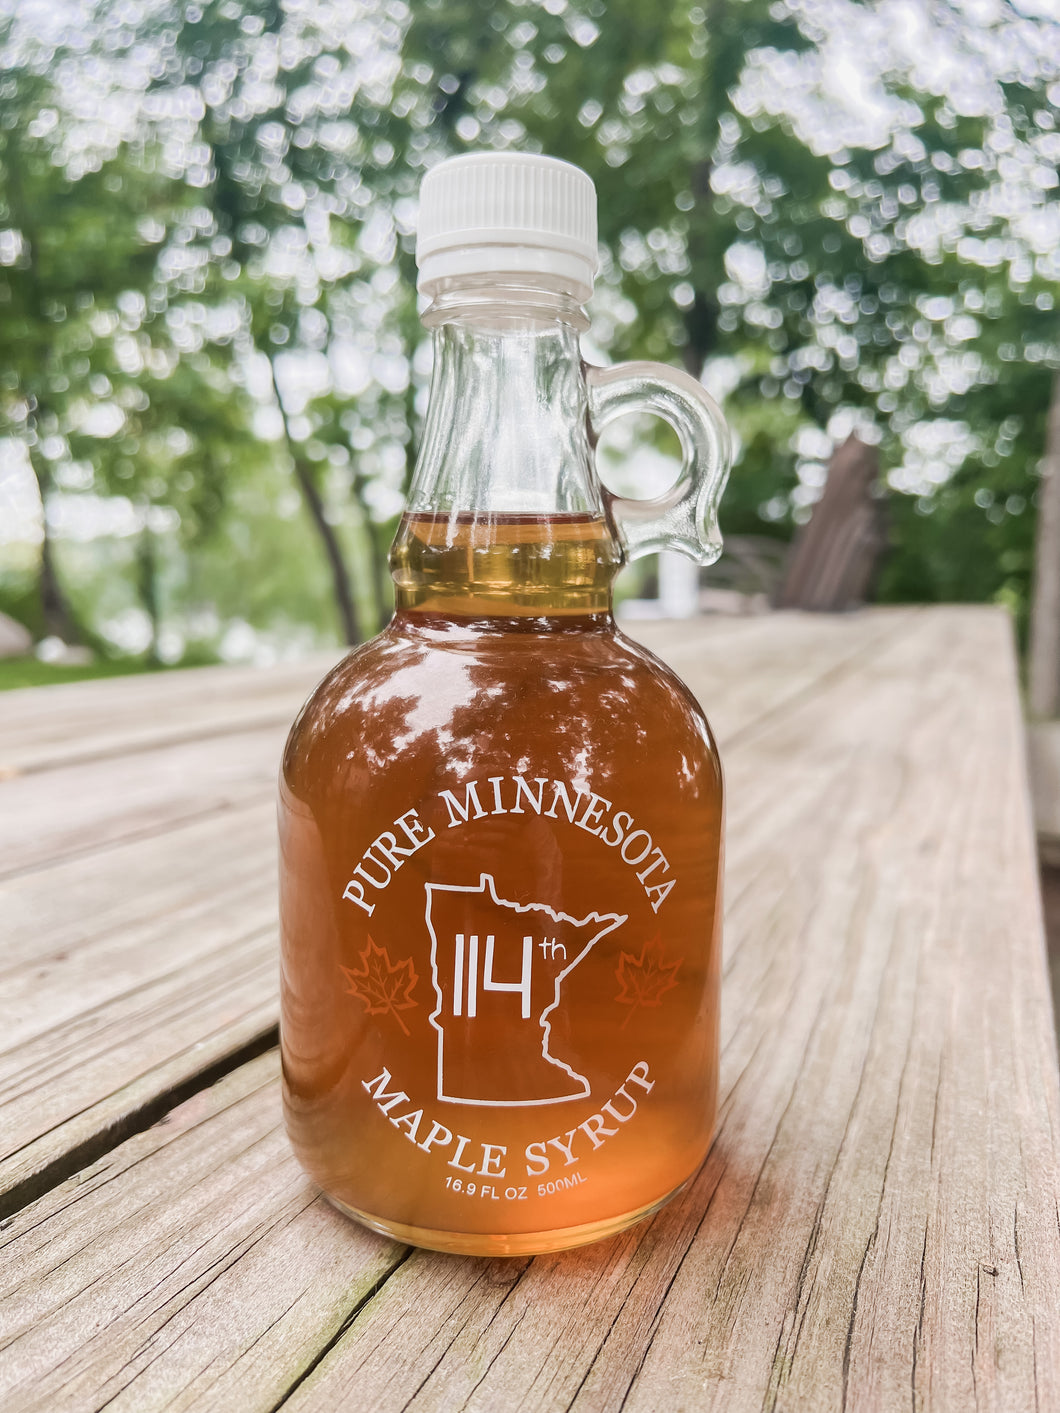 114th Maple Syrup